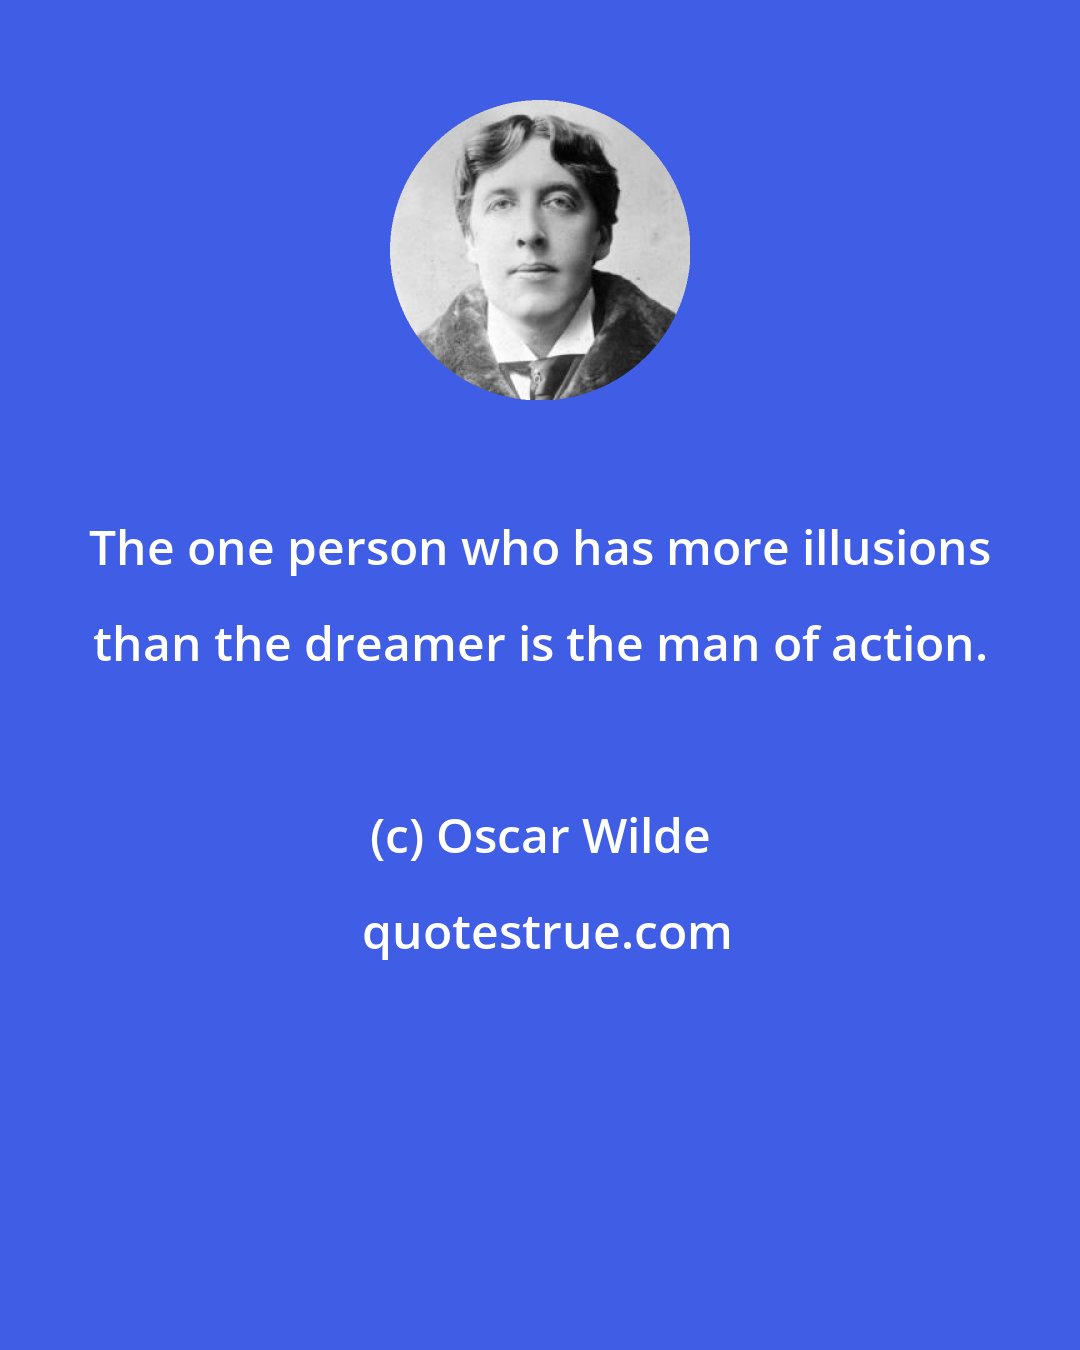 Oscar Wilde: The one person who has more illusions than the dreamer is the man of action.